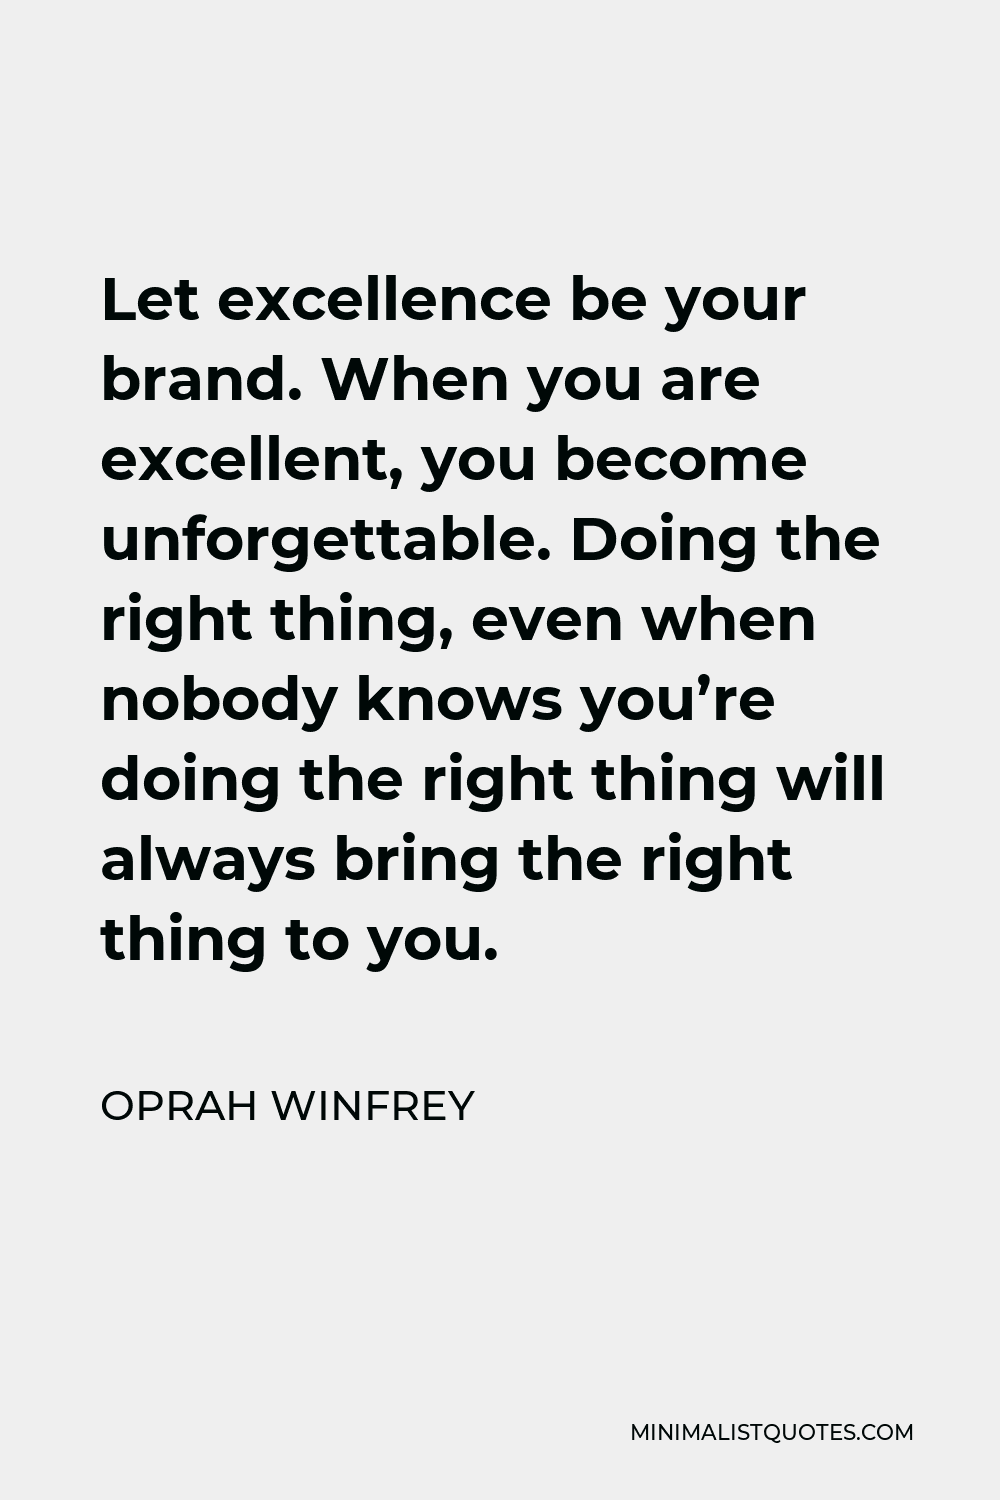 Oprah Winfrey Quote - Let excellence be your brand. When you are excellent, you become unforgettable. Doing the right thing, even when nobody knows you’re doing the right thing will always bring the right thing to you.